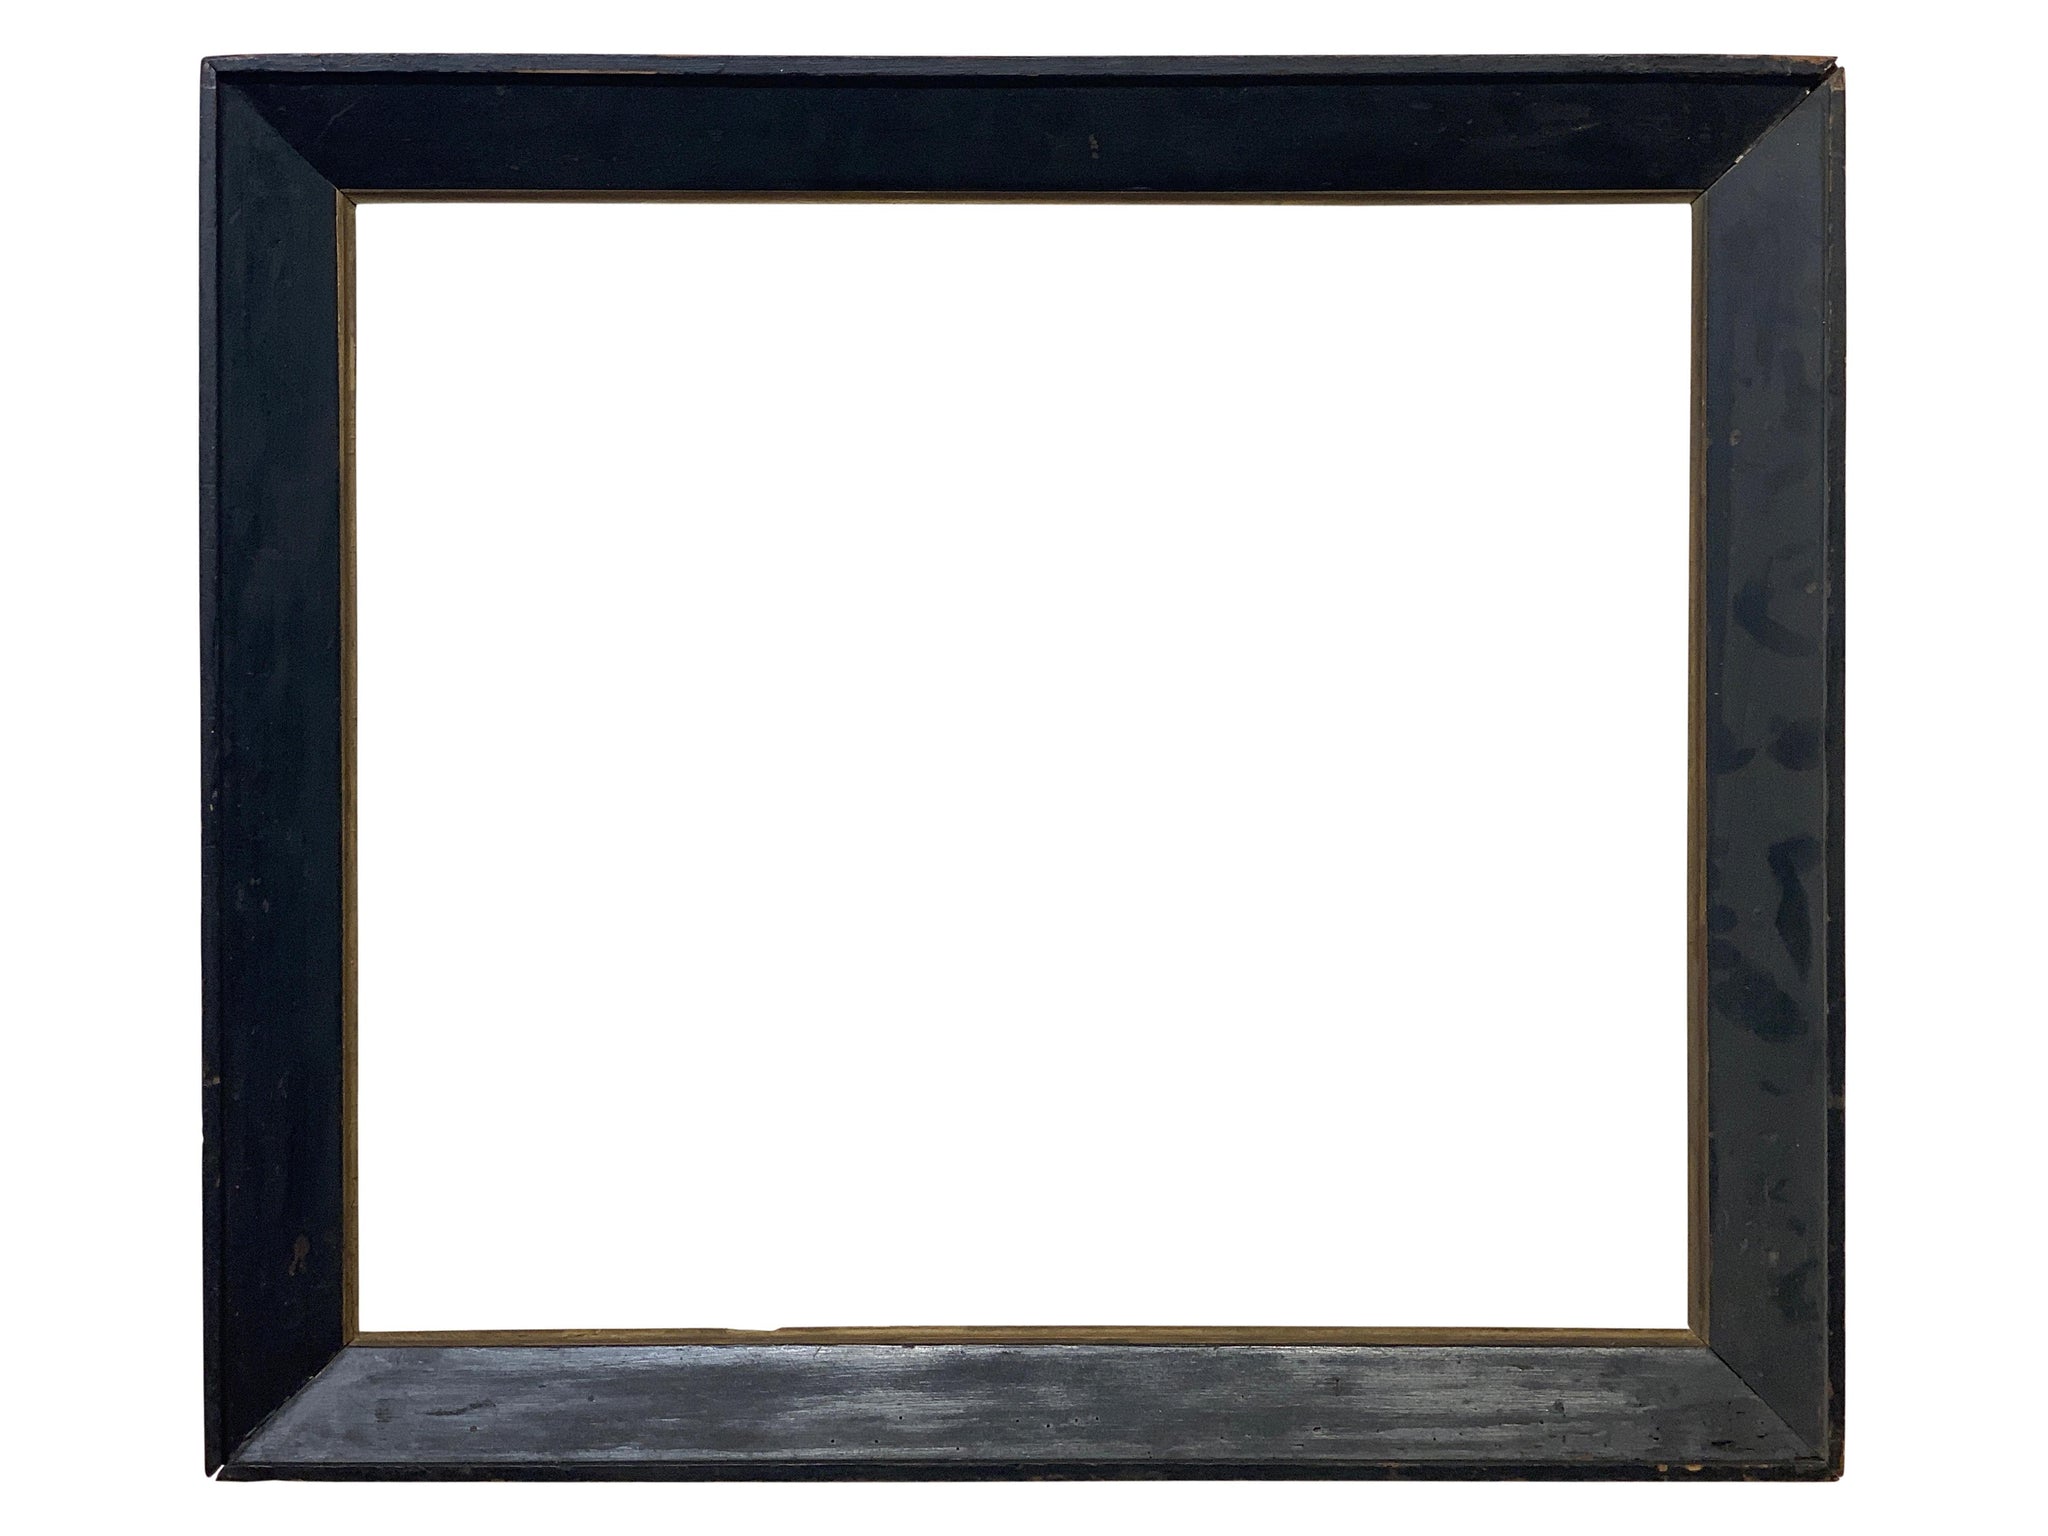 22x26 Inch Antique Black Canted Profile Picture Frame For Canvas Art circa 1900s (20th Century).